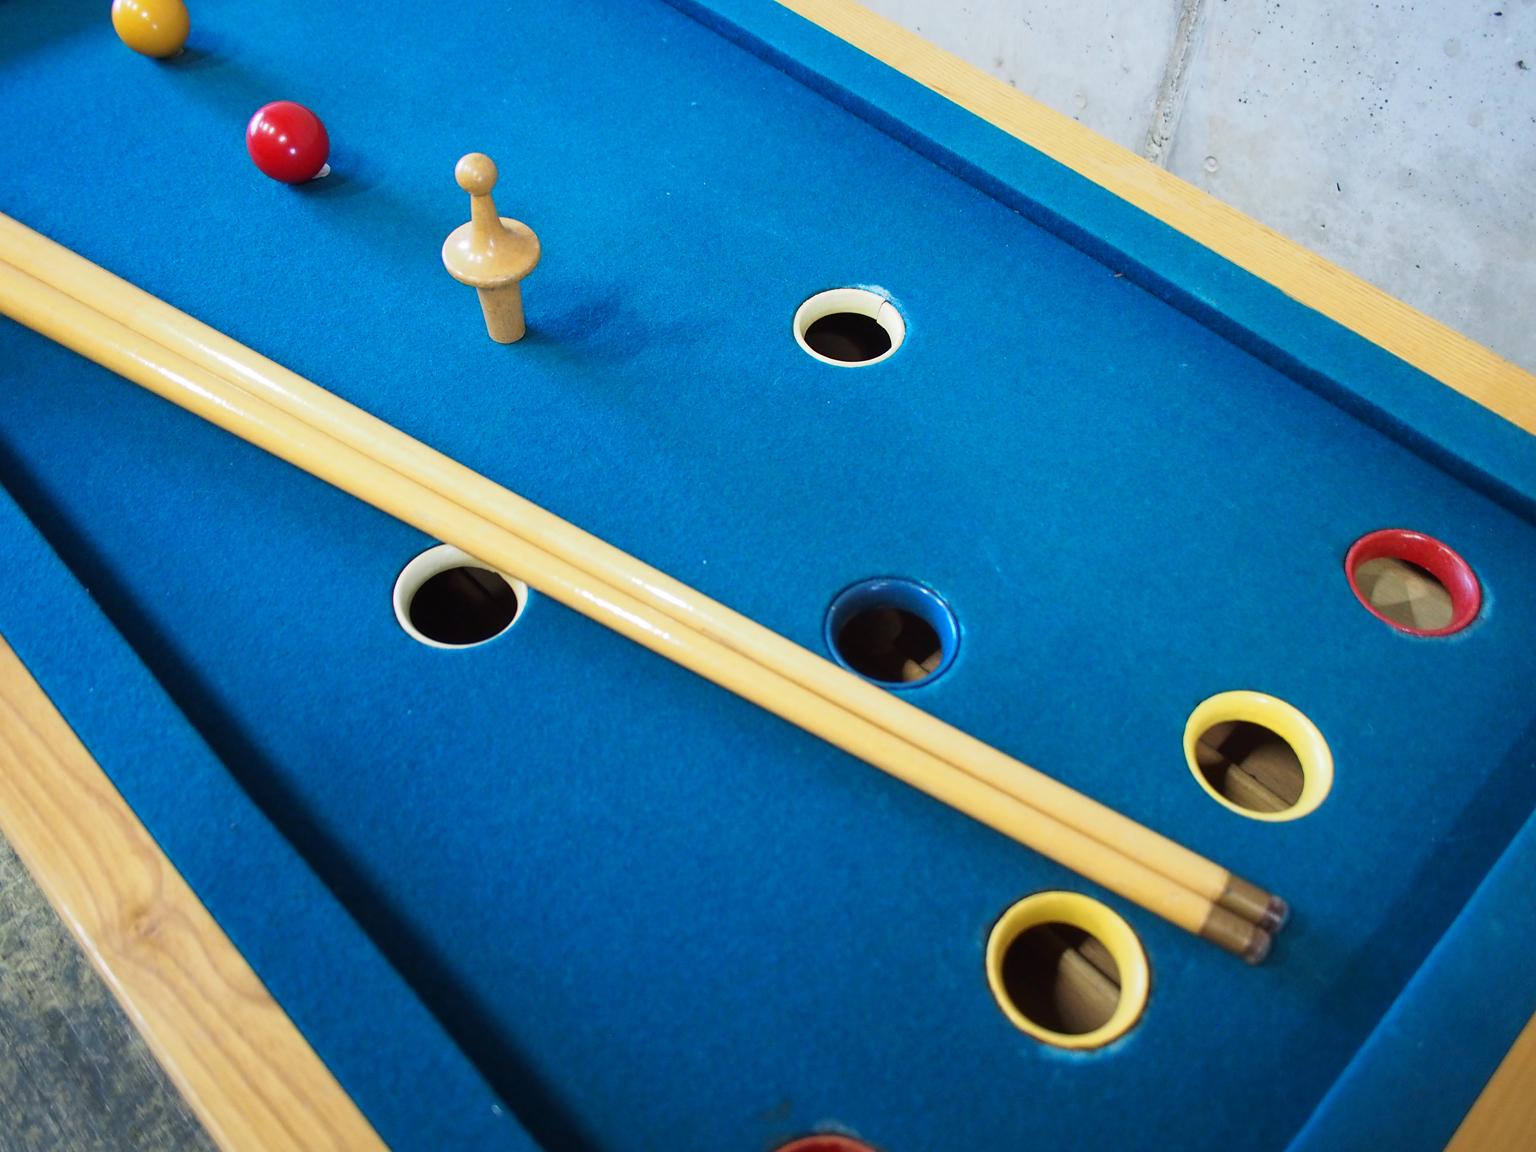 Wood Small Table Poolgame with 2 Billiard Cues from the 1950s